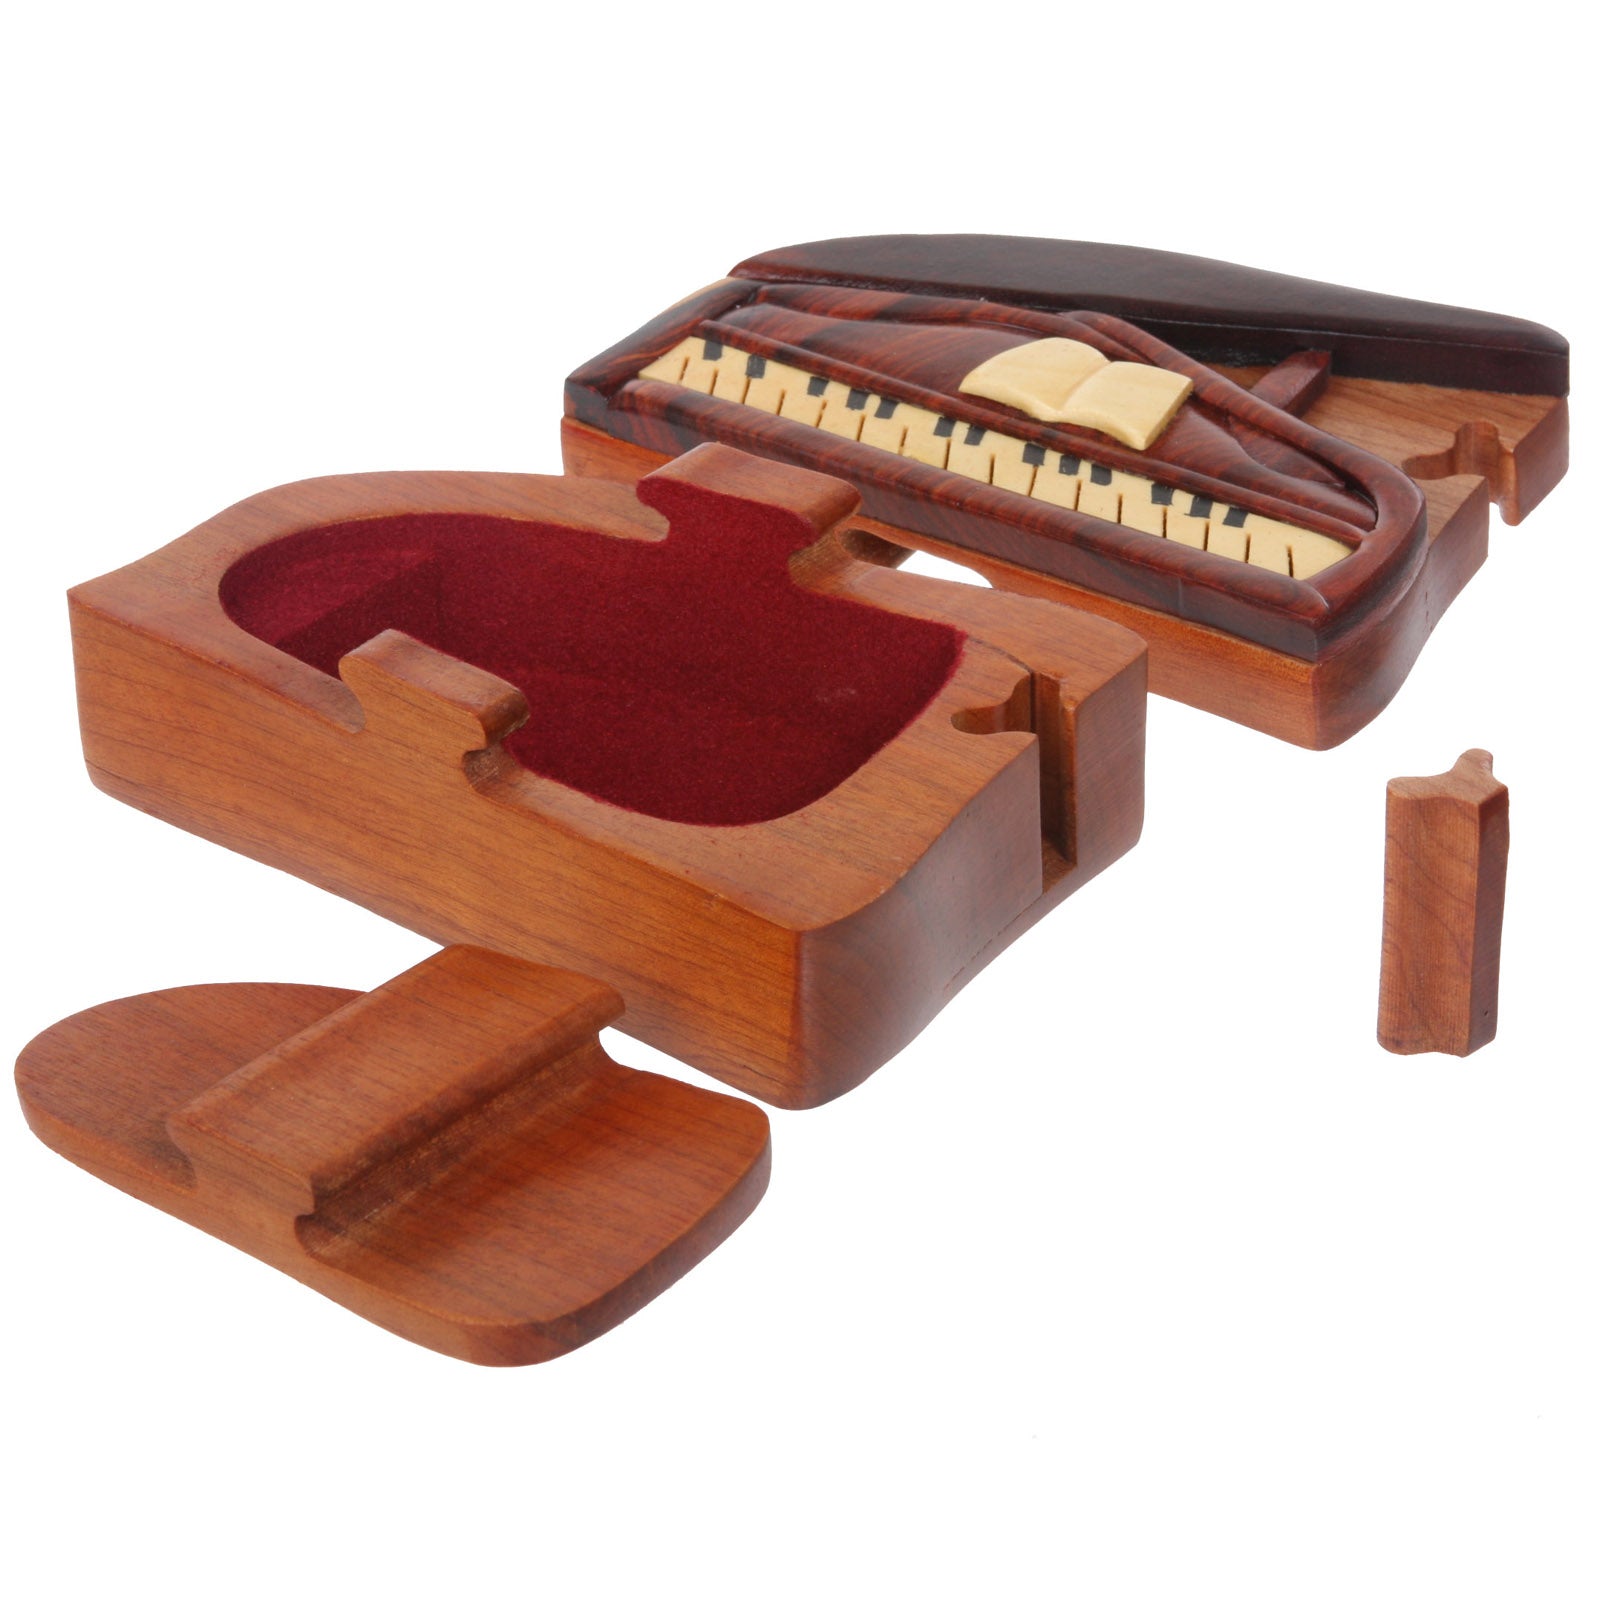 Handcrafted Wooden Musical Instrument Secret Jewelry Puzzle Box - Piano